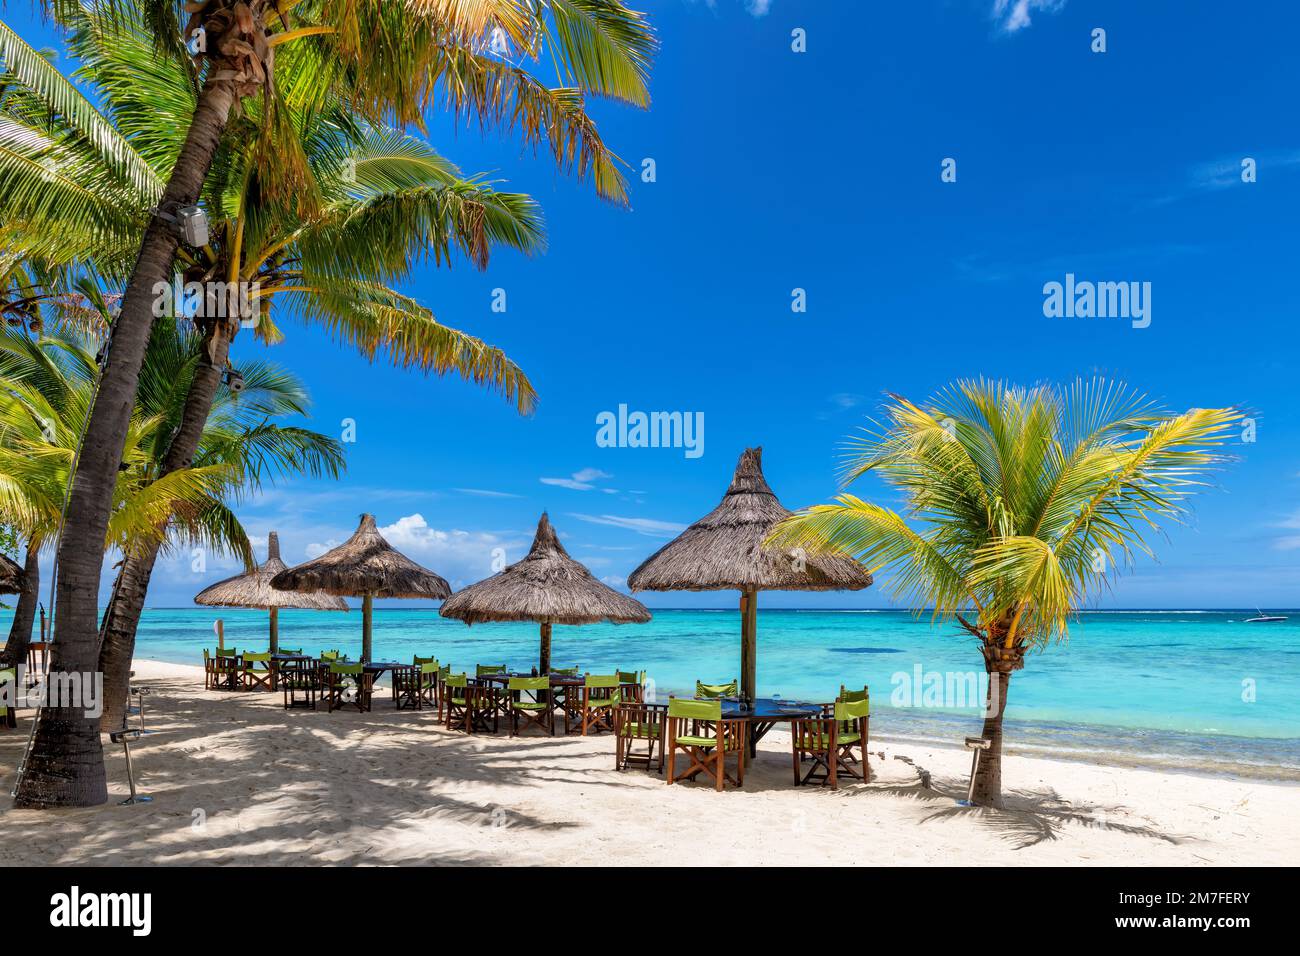 Beach cafe on sandy beach, tables under straw umbrellas, palm trees and beautiful sea on exotic tropical island. Stock Photo